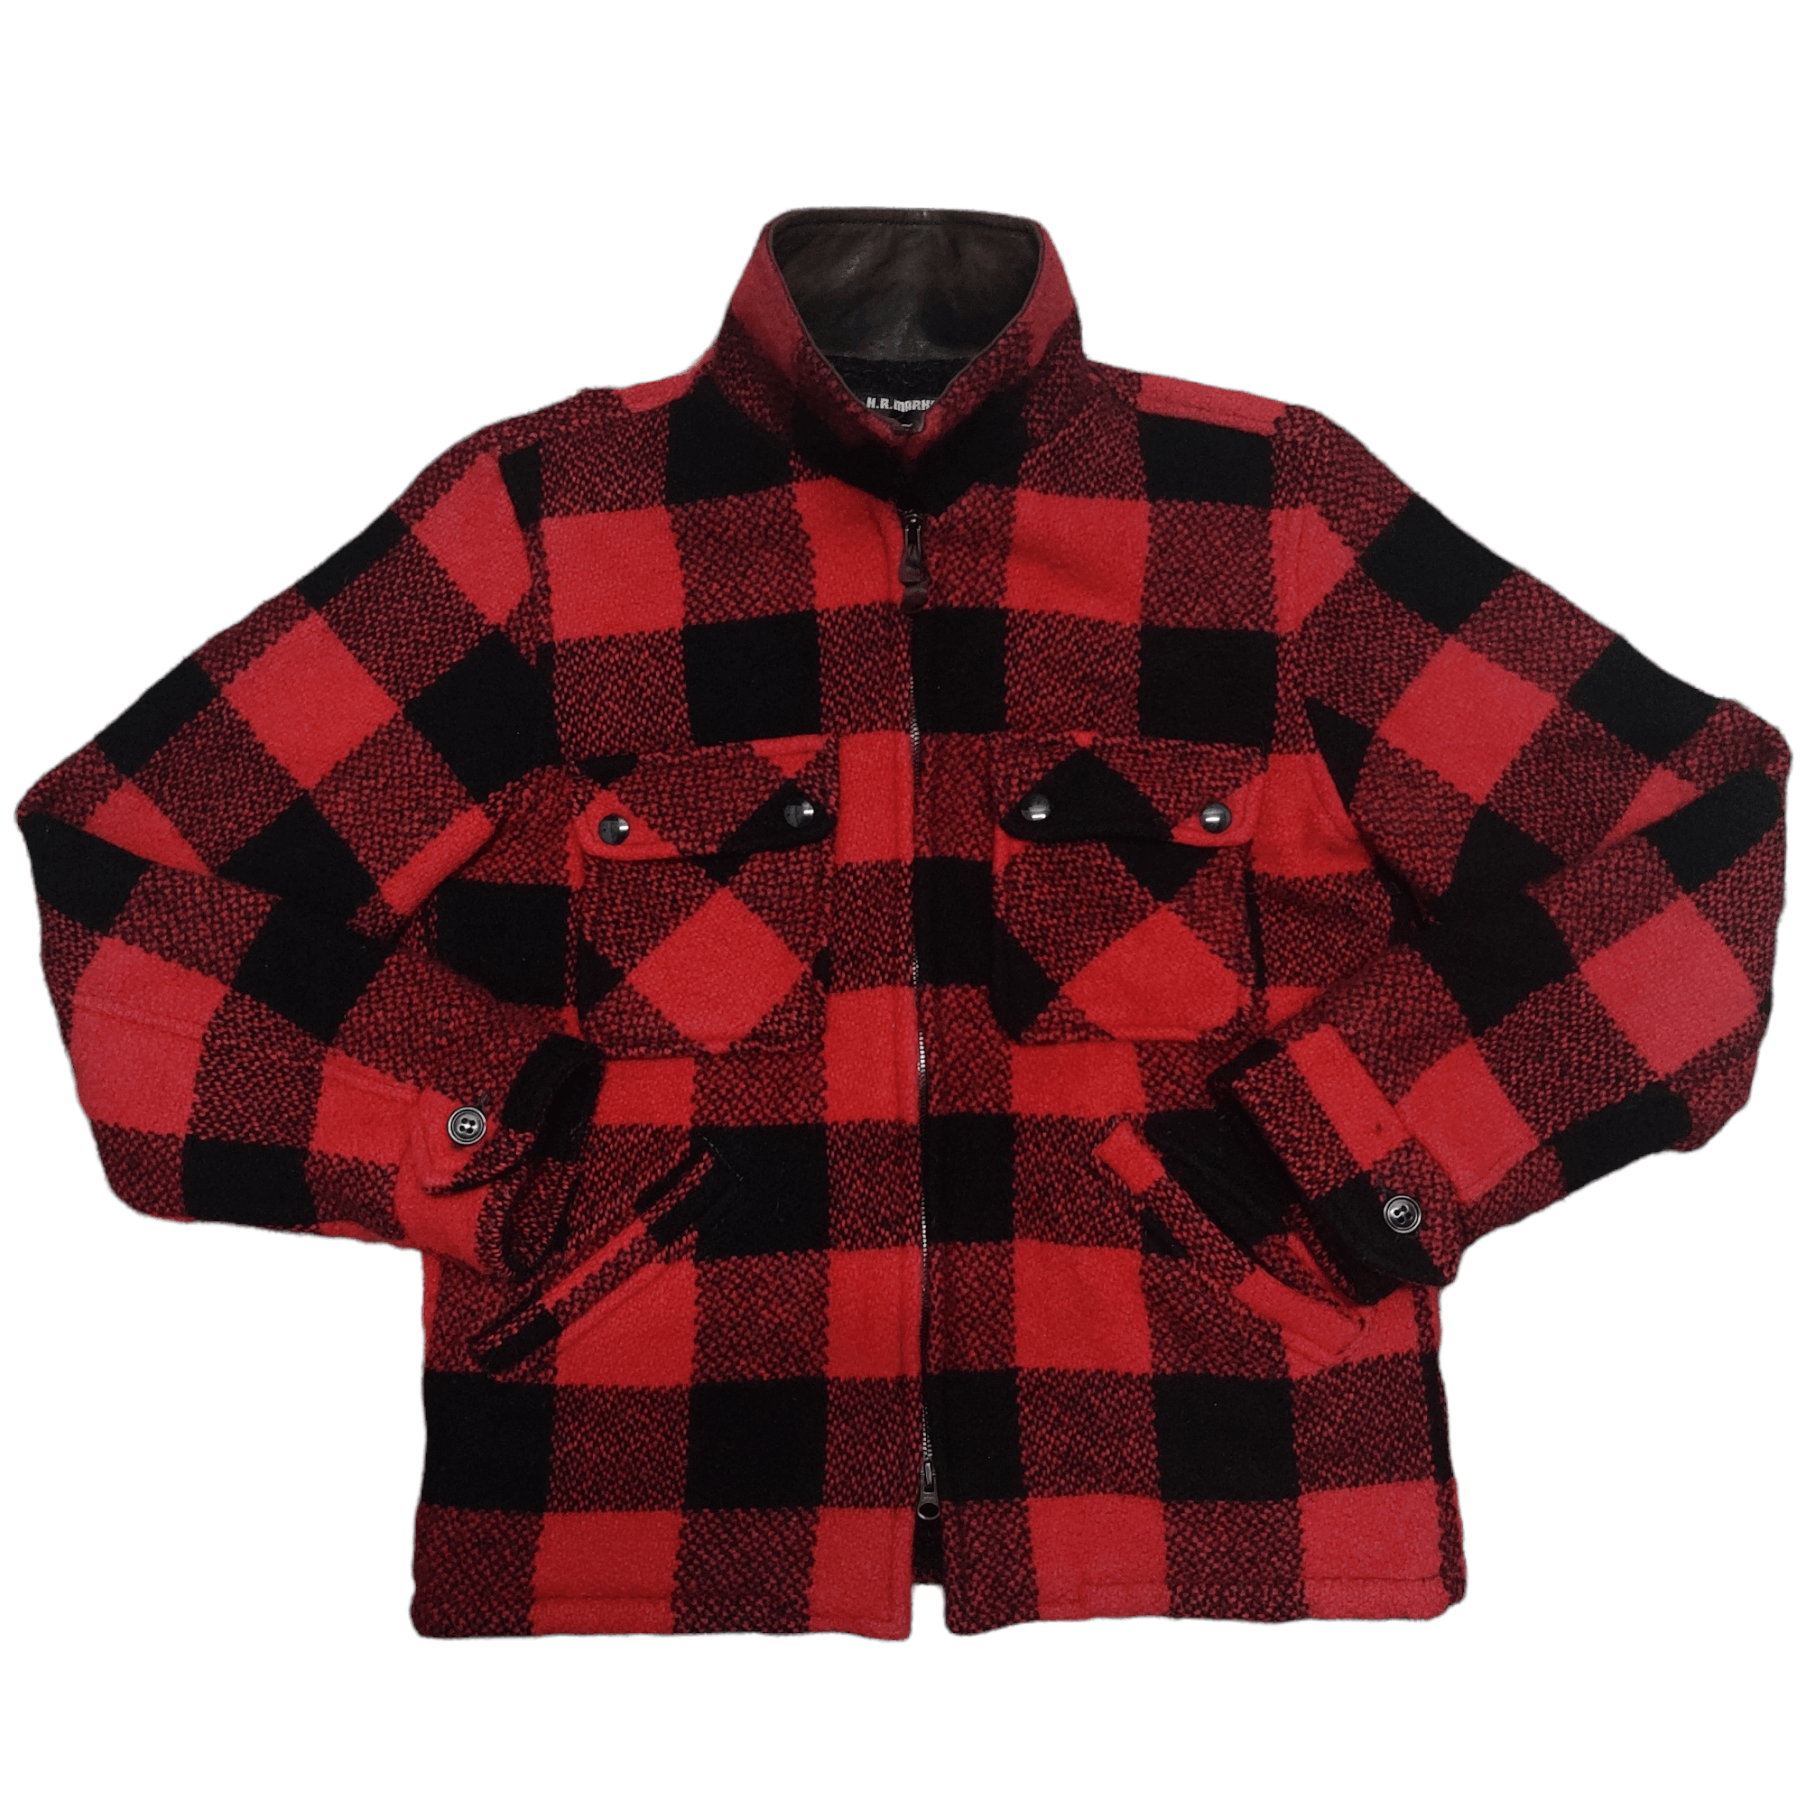 Vintage Plaid Jacket by Brother, Red and Black Plaid Jacket 